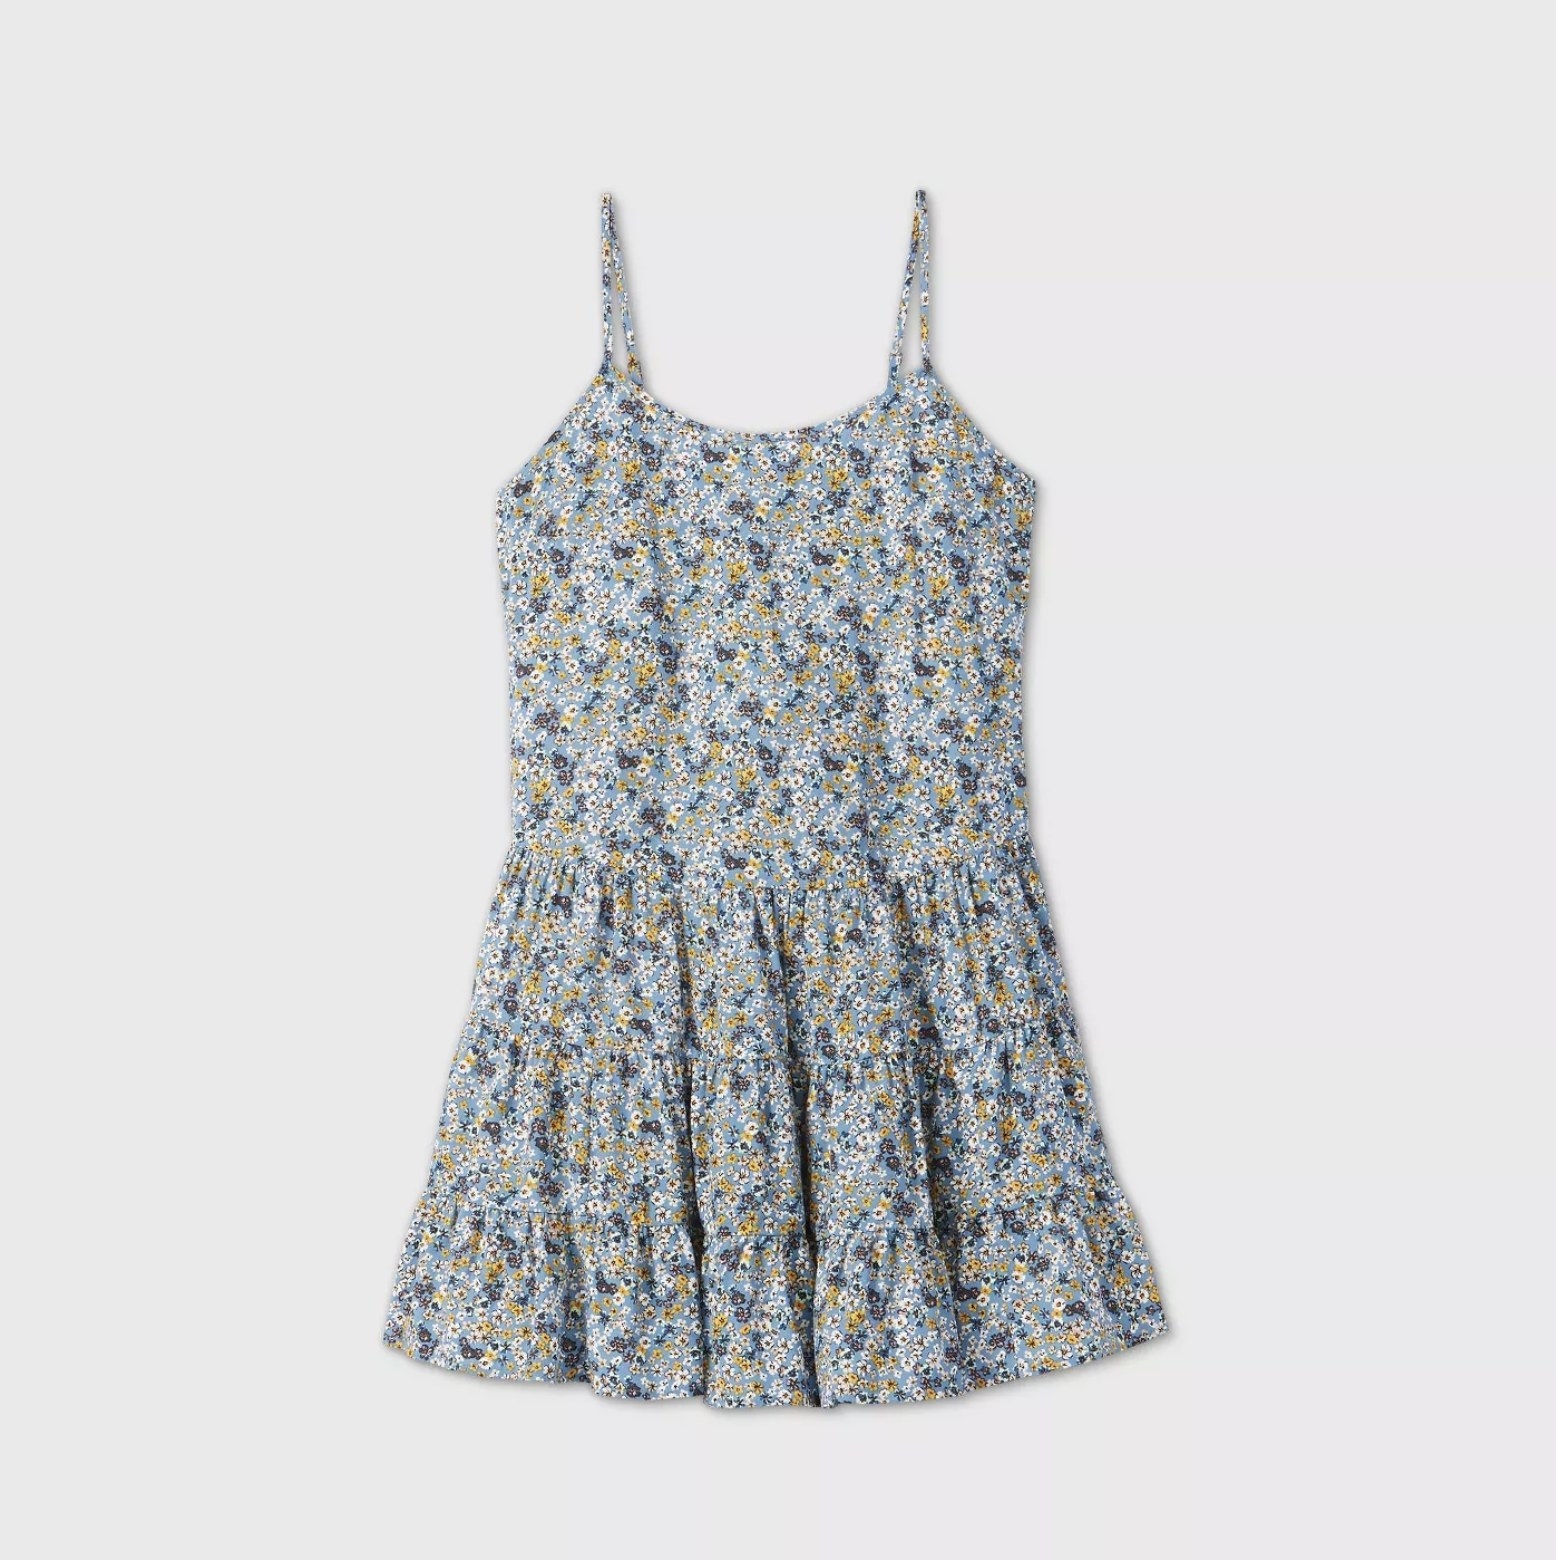 An image of a  light blue floral print trapeze dress with thin shoulder straps and a ruffled drop waist